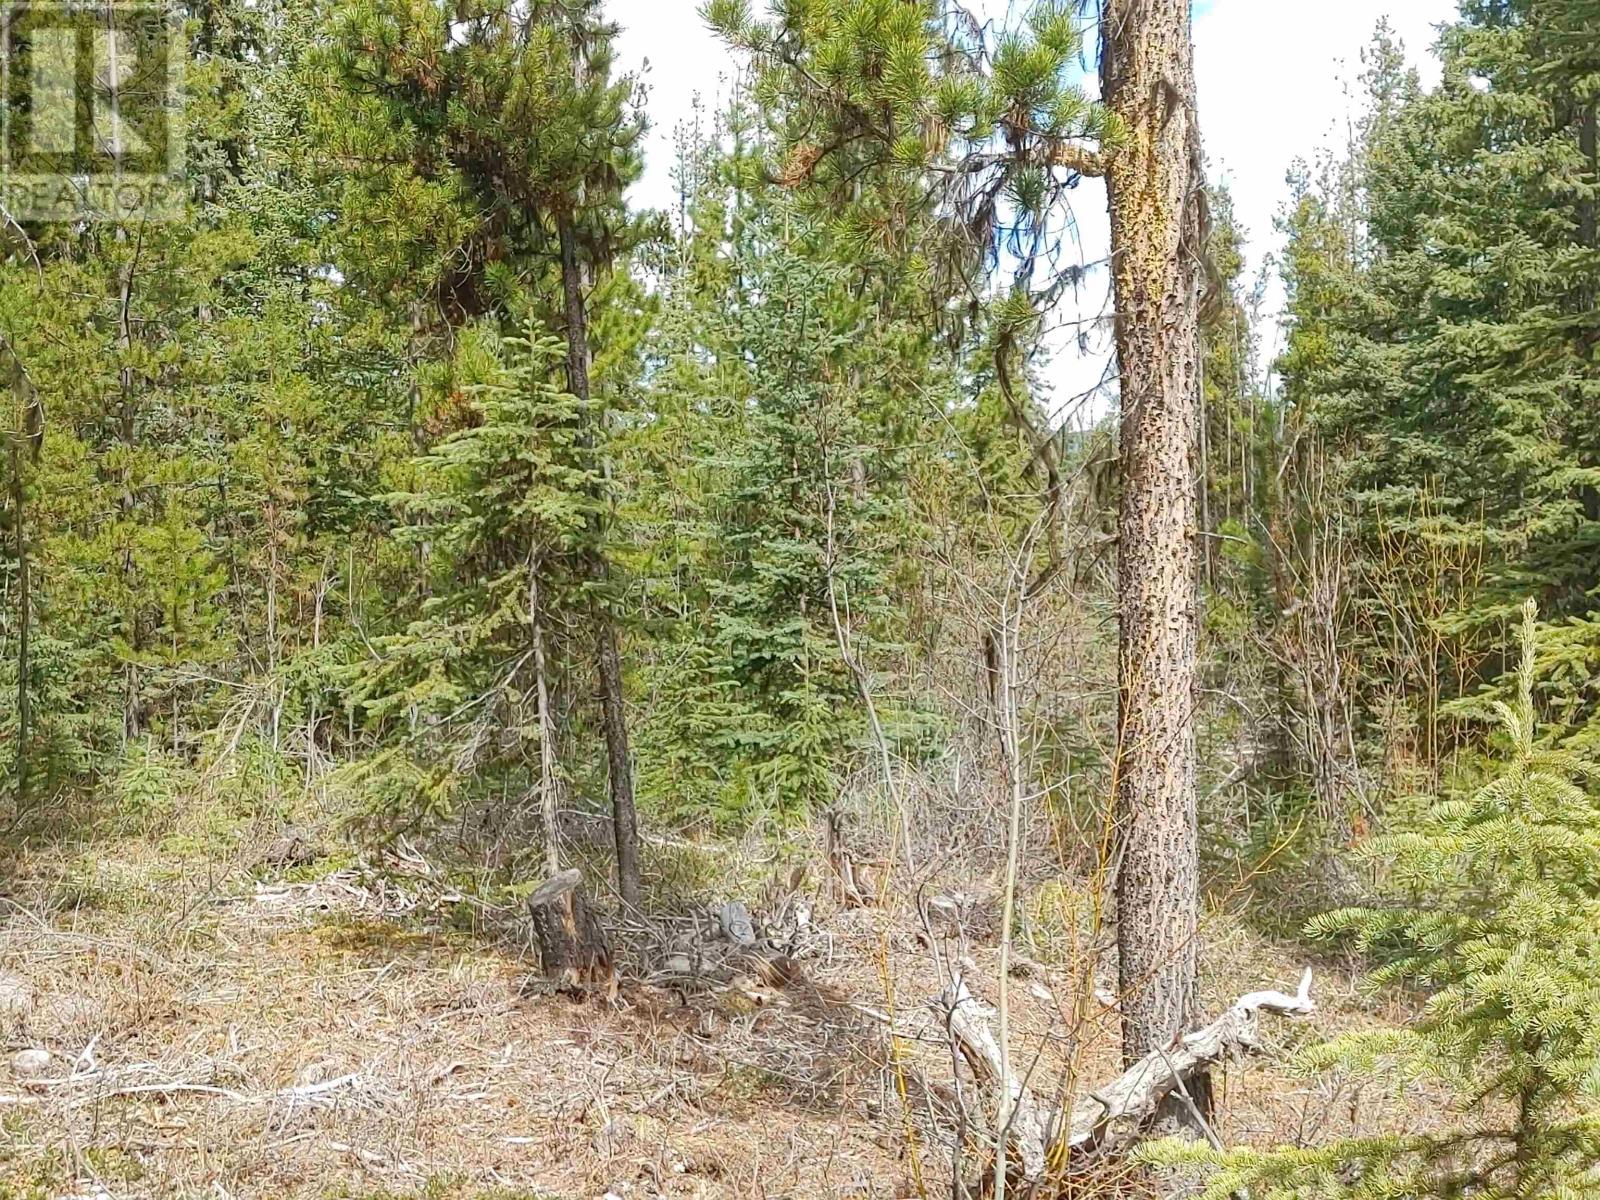 LOT 9 AGER ROAD located in Burns Lake, British Columbia